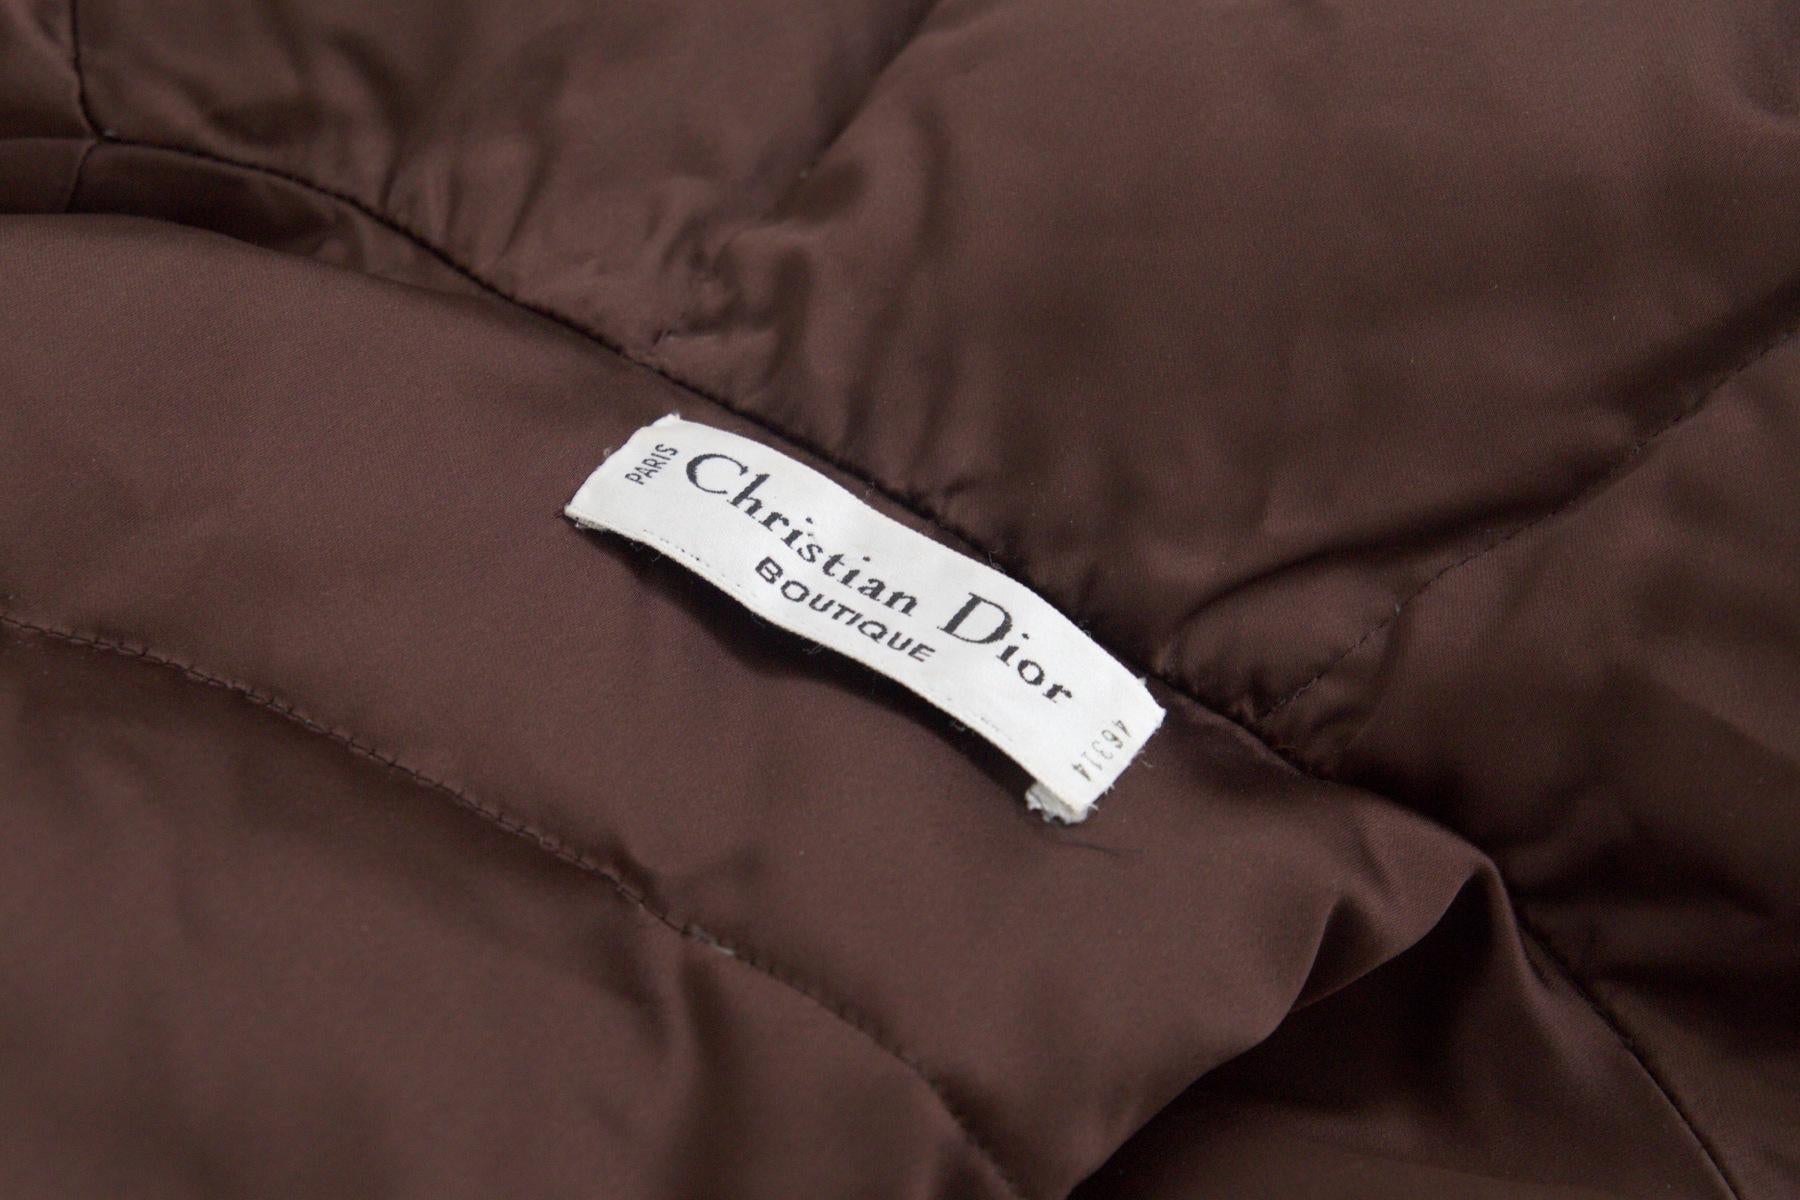 Sumptuous vintage down jacket designed by Christian Dior in the 1980s, made in Paris. ORIGINAL LABEL.
The jacket is made of velvet and silk satin lining, very nice. The outside is dark velvet with purple undertones, the inside is lined in brown,